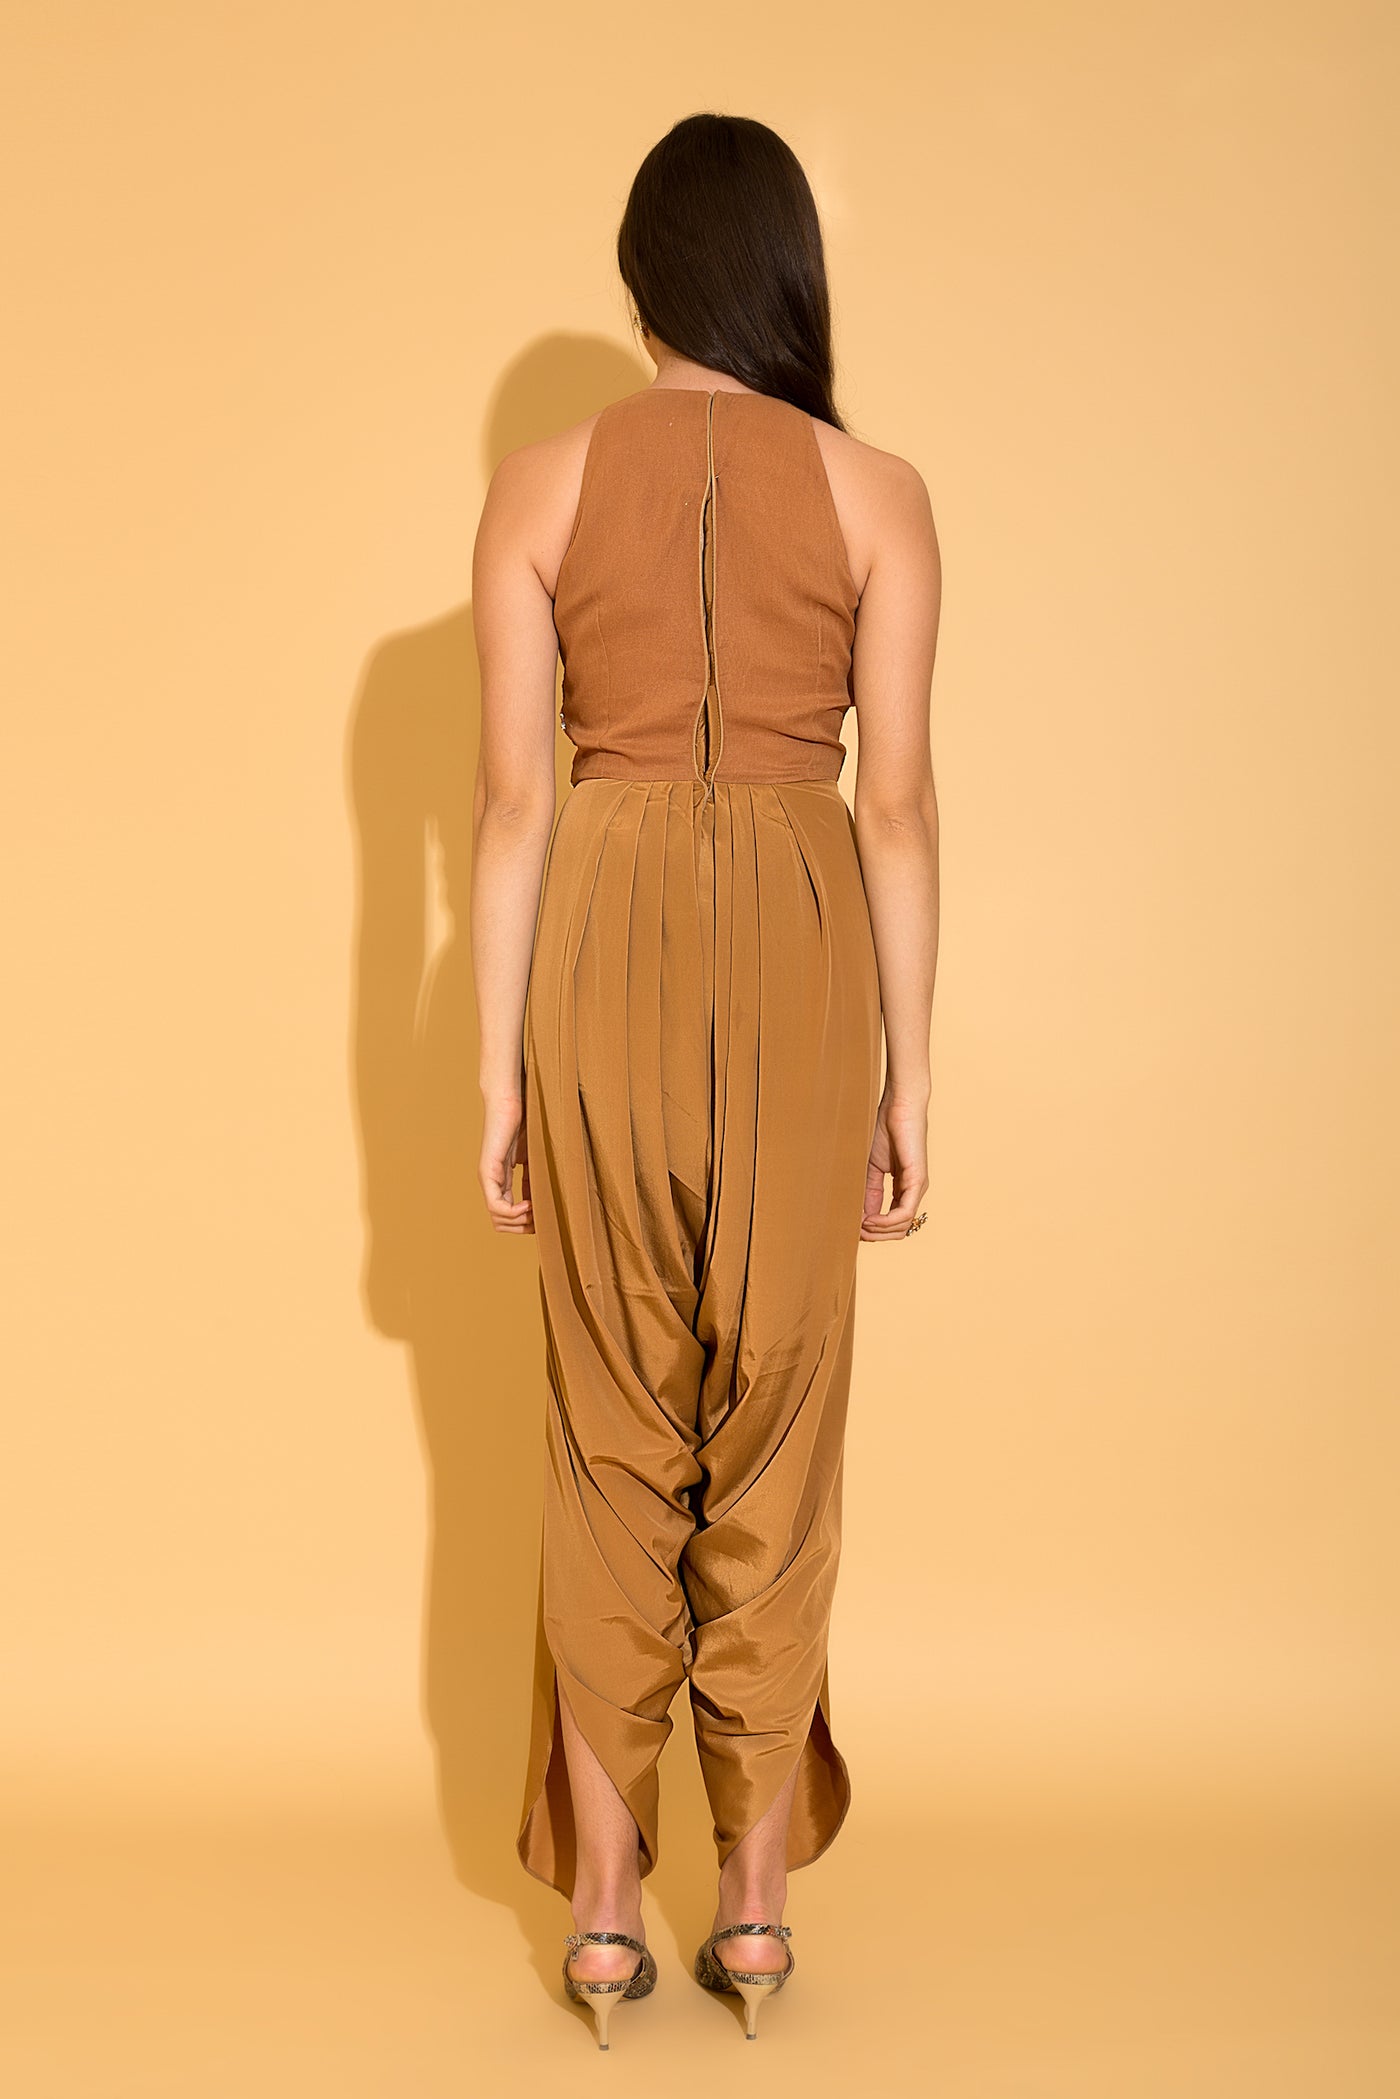 Iced Coffee Embroidered Dhoti Jumpsuit